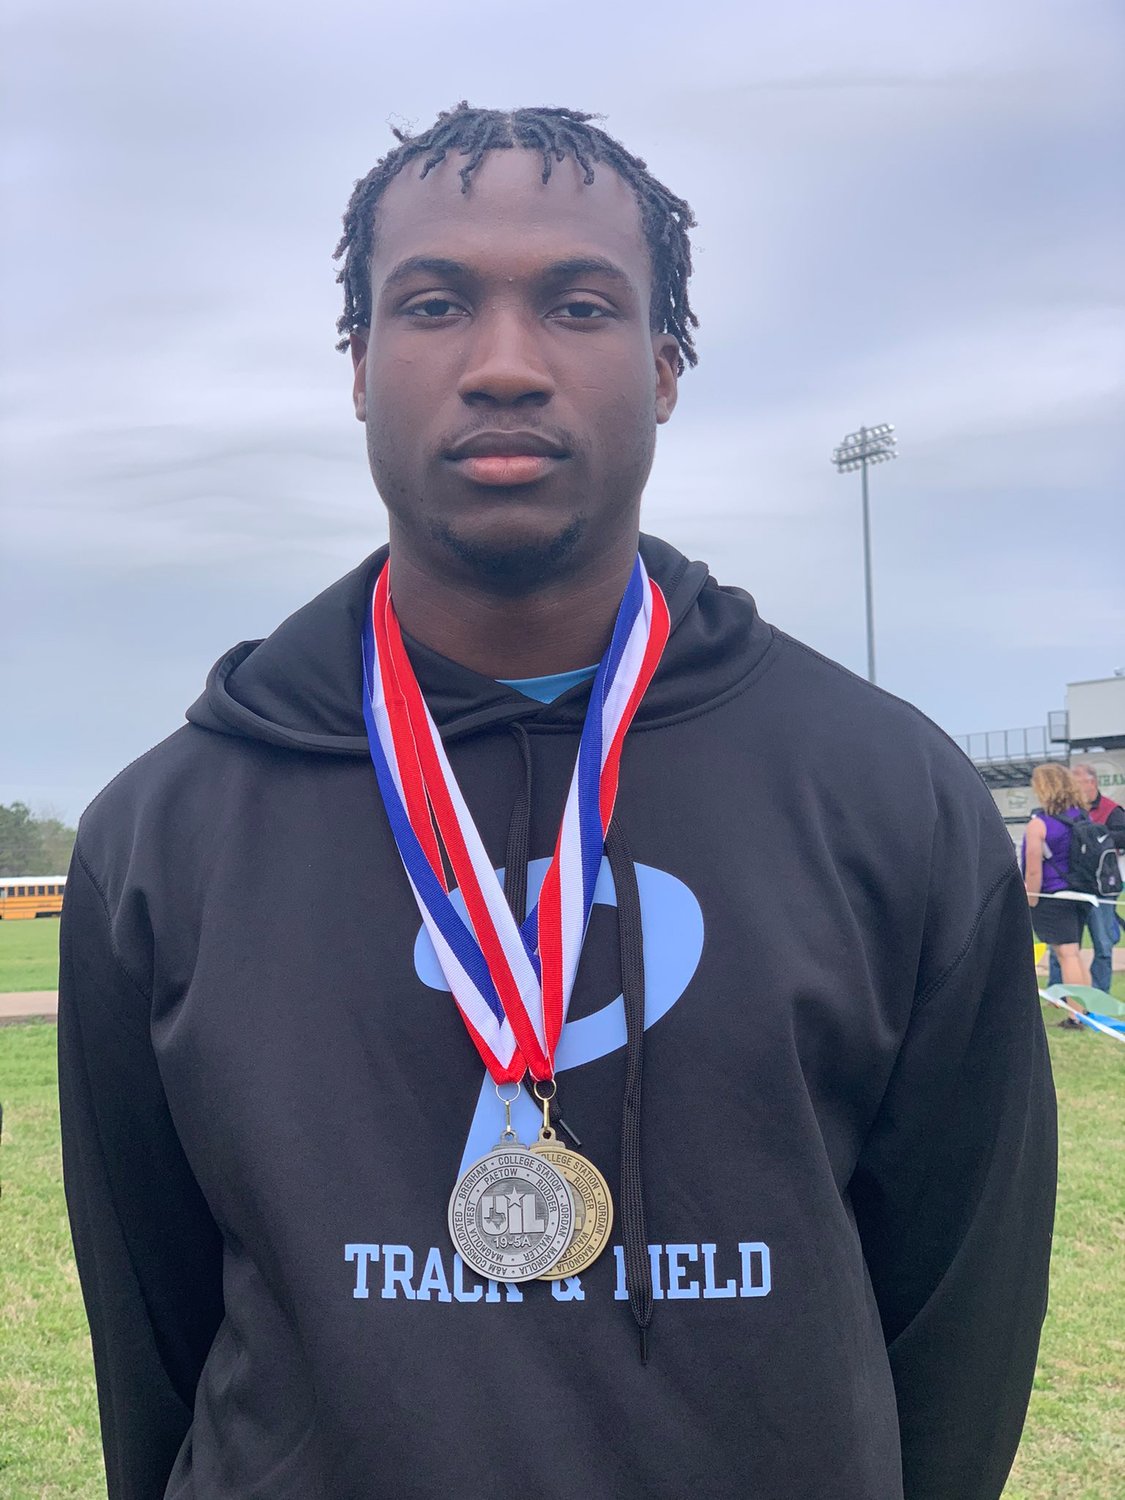 Paetow junior Charles Chukwu won gold in the discus and silver in the shot put at the District 19-5A track and field meet.